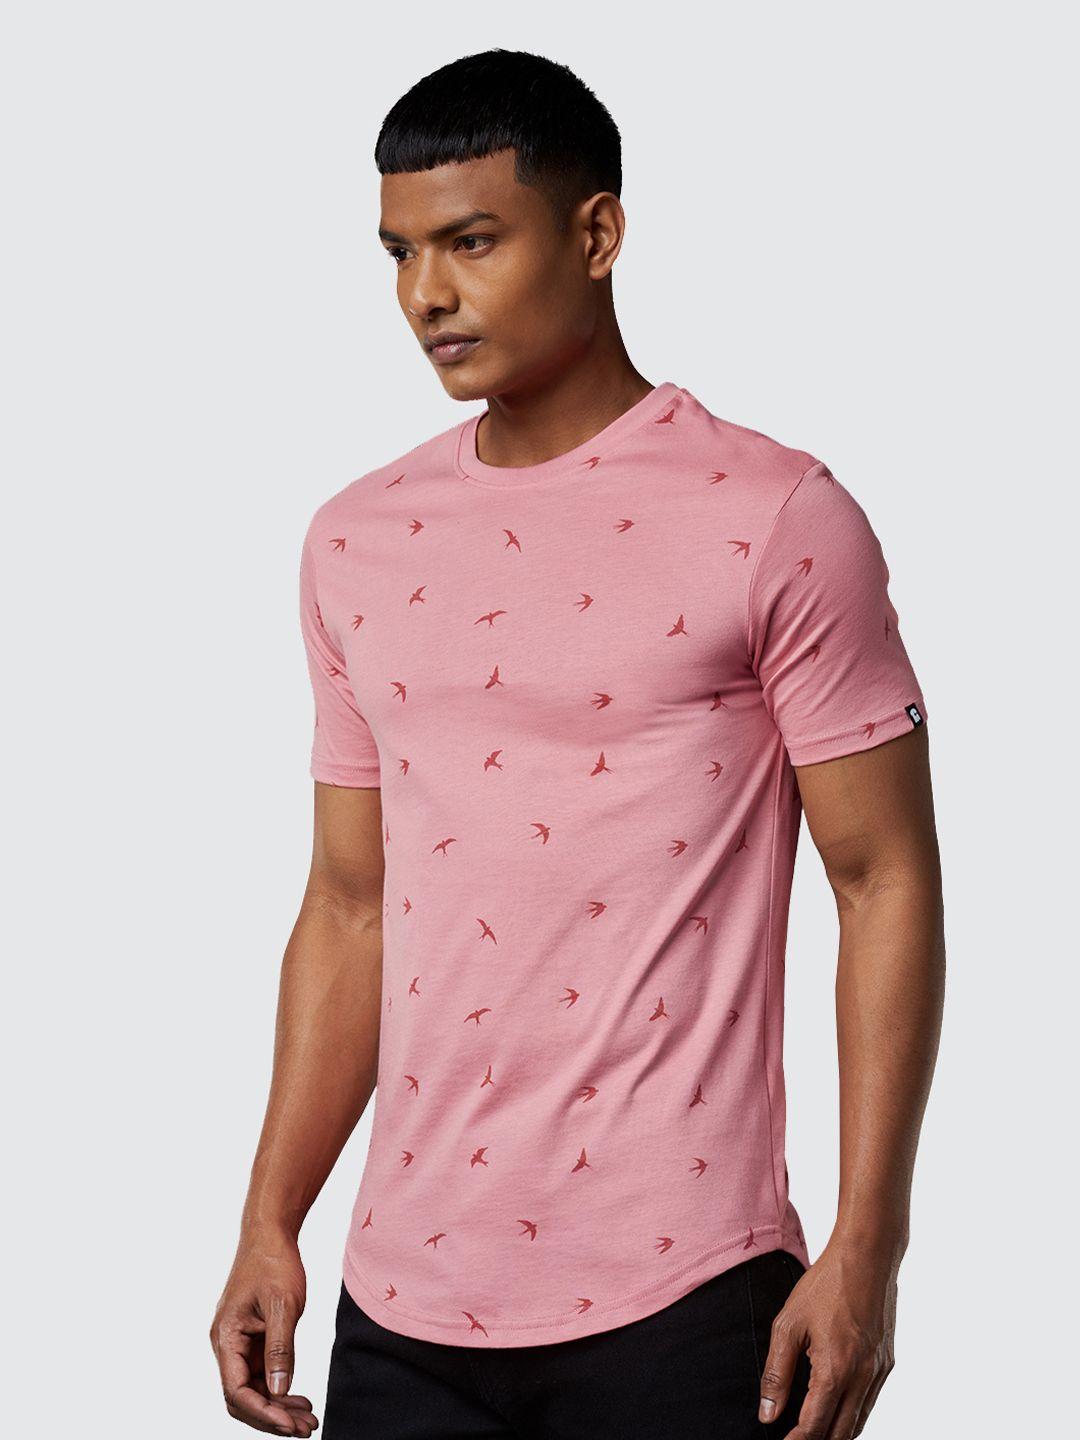 the souled store men pink printed t-shirt